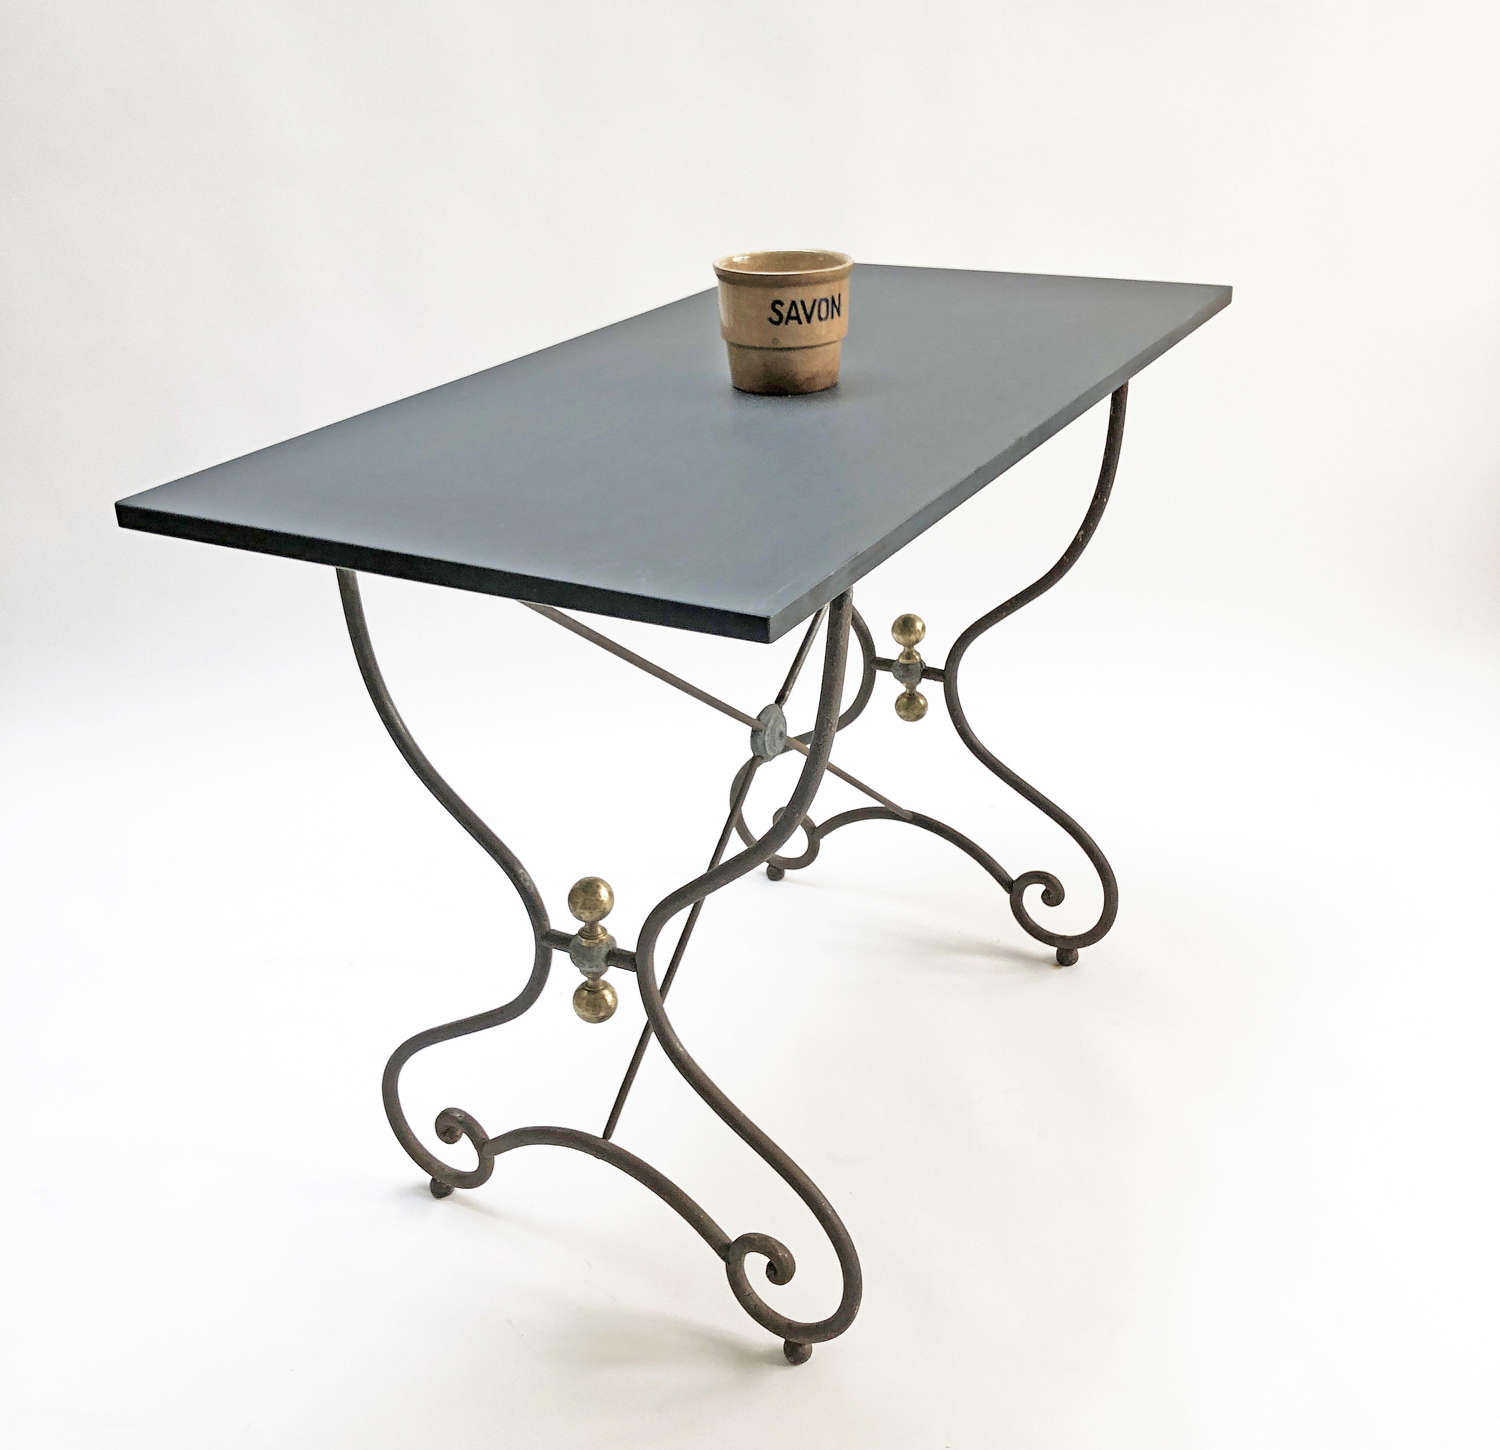 19th c French Cafe Table with Slate Top - circa 1860